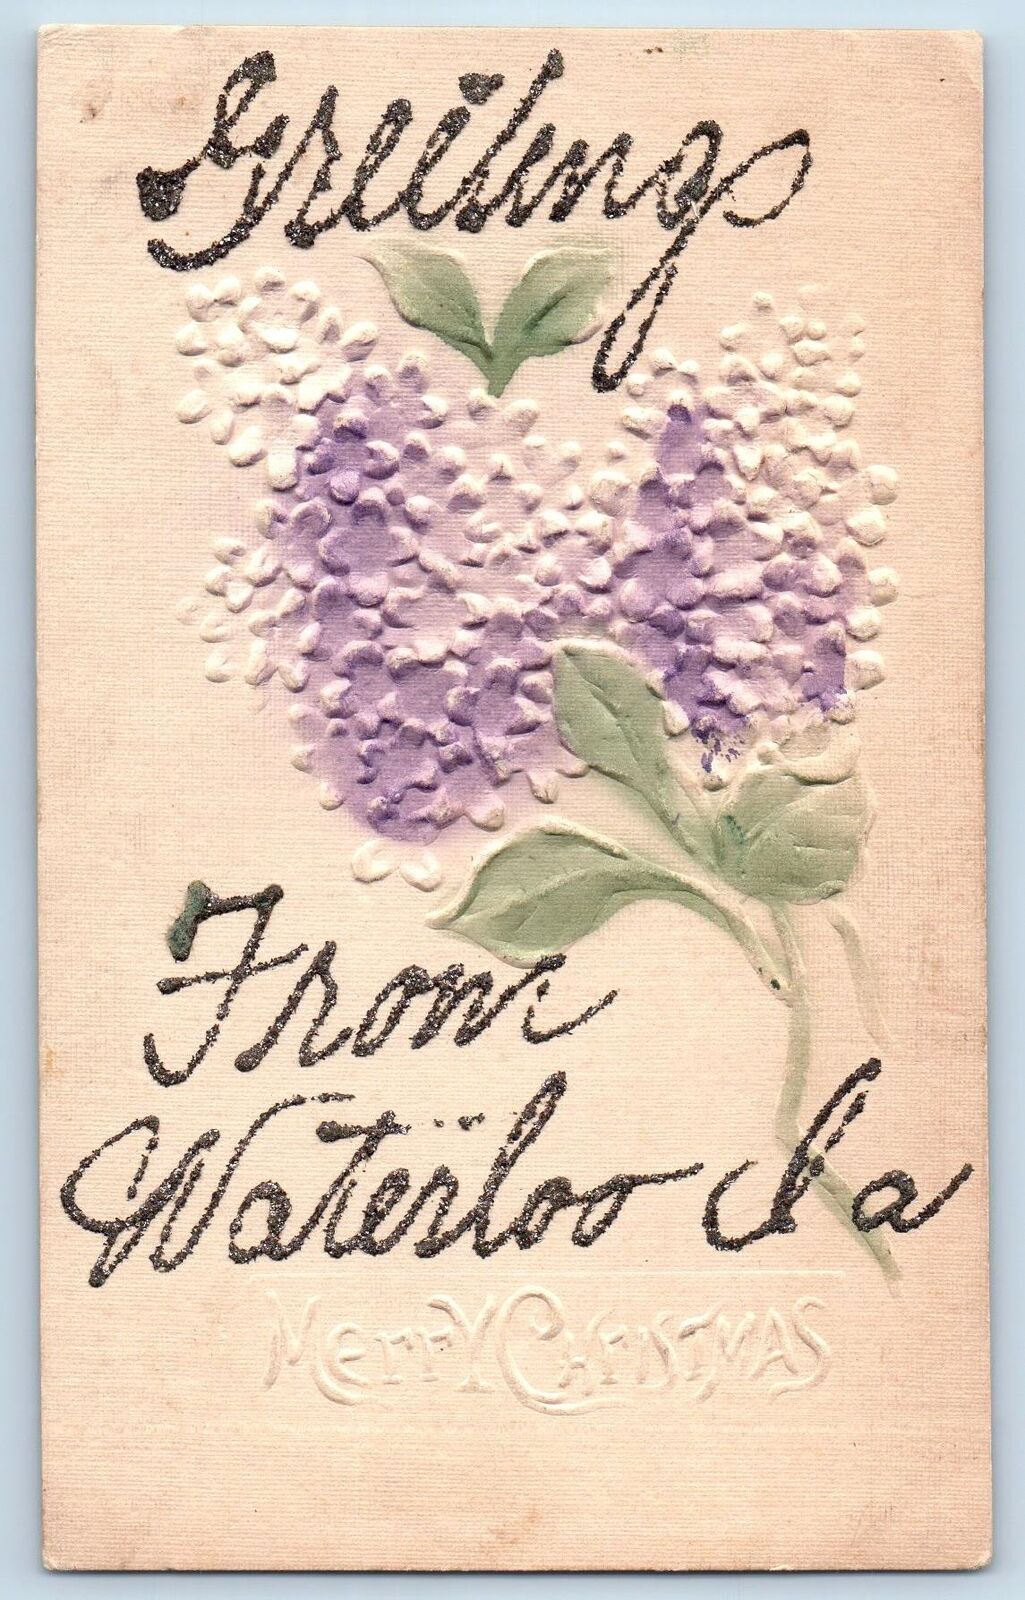 Manchester Iowa IA Postcard Greetings Embossed Airbrushed Flowers Leaves c1910s